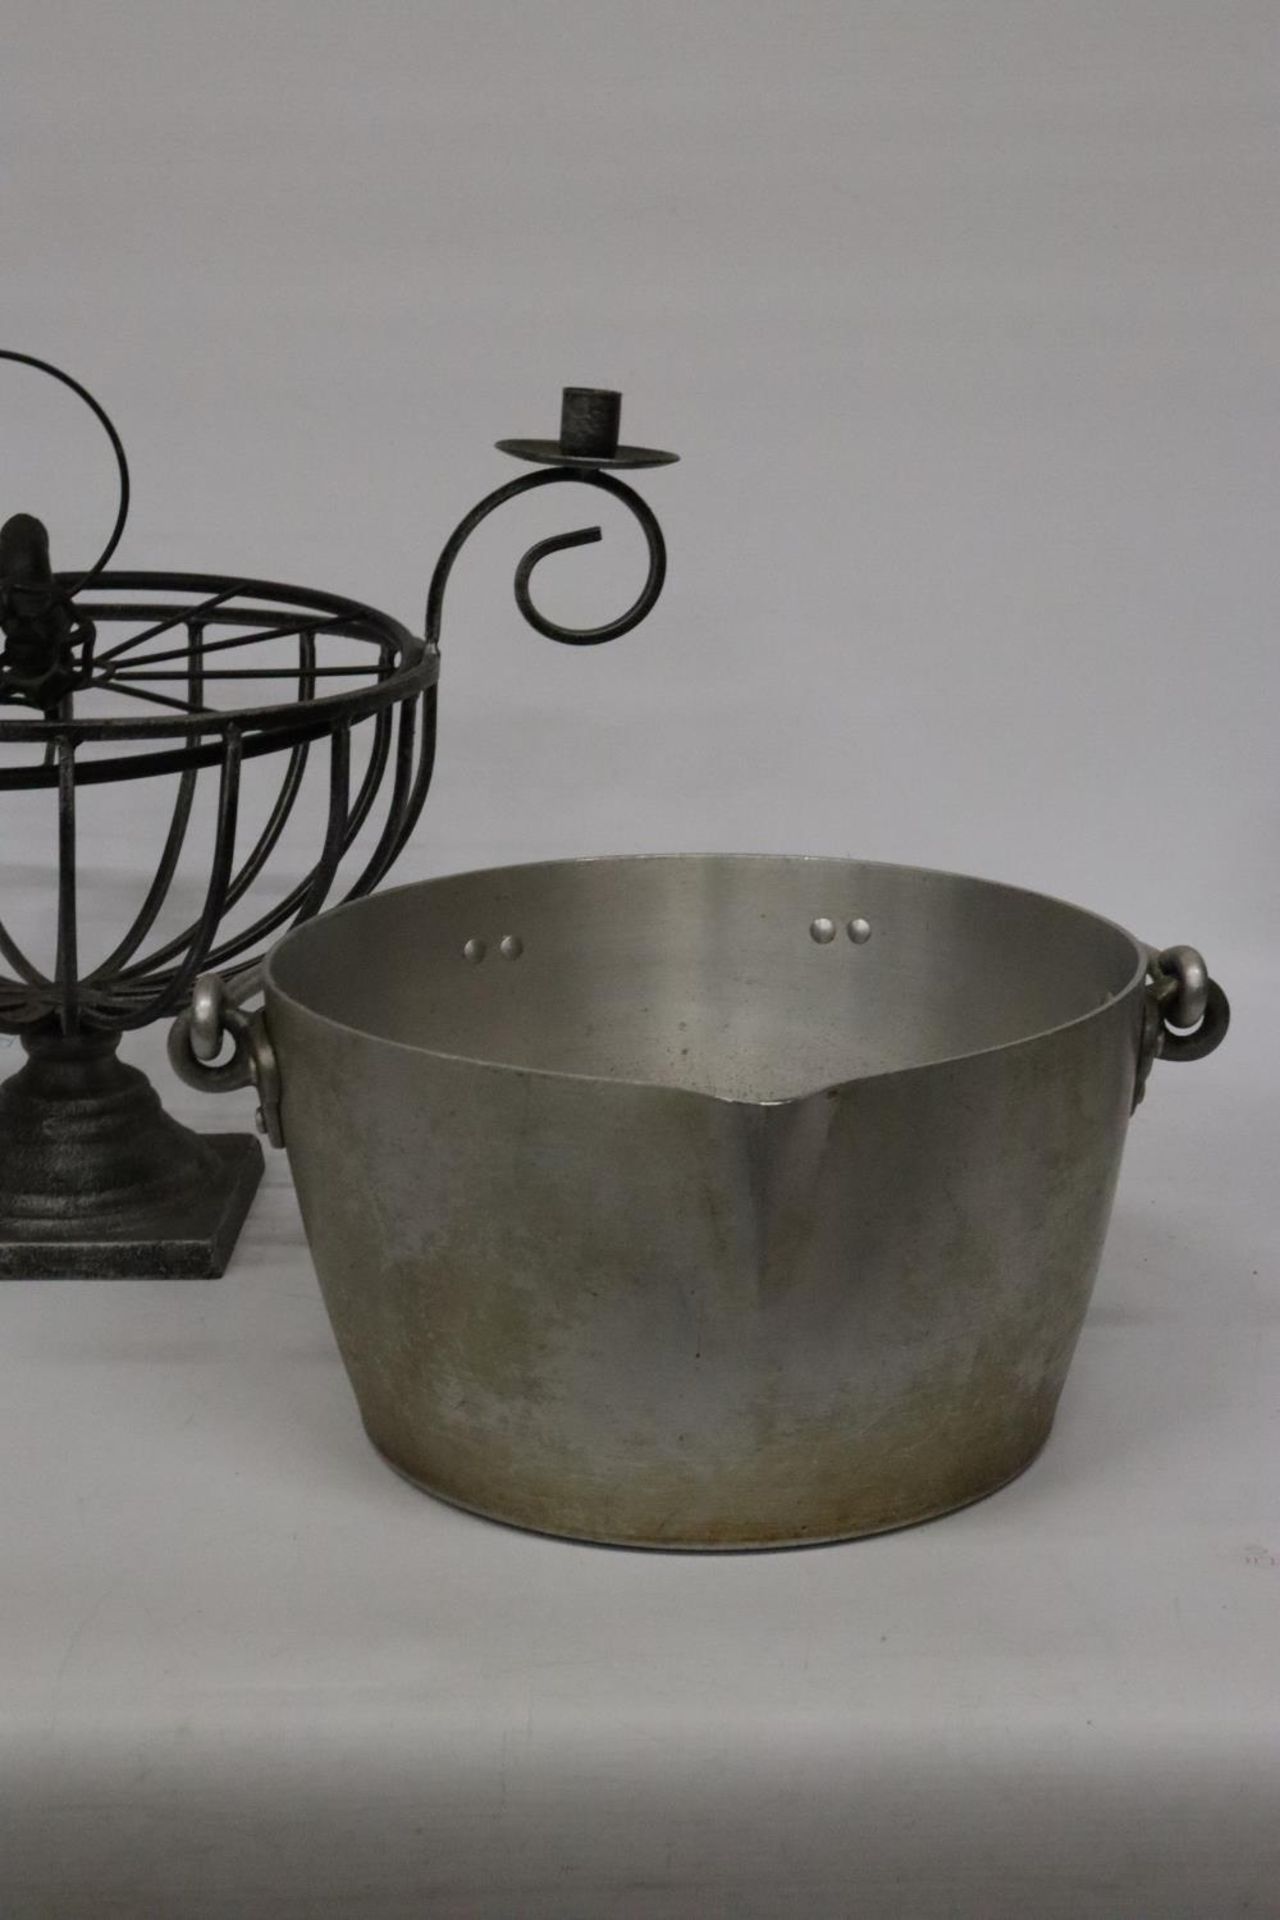 A JAM PAN AND A METAL PLANT HOLDER WITH CANDLESTICKS - Image 2 of 3